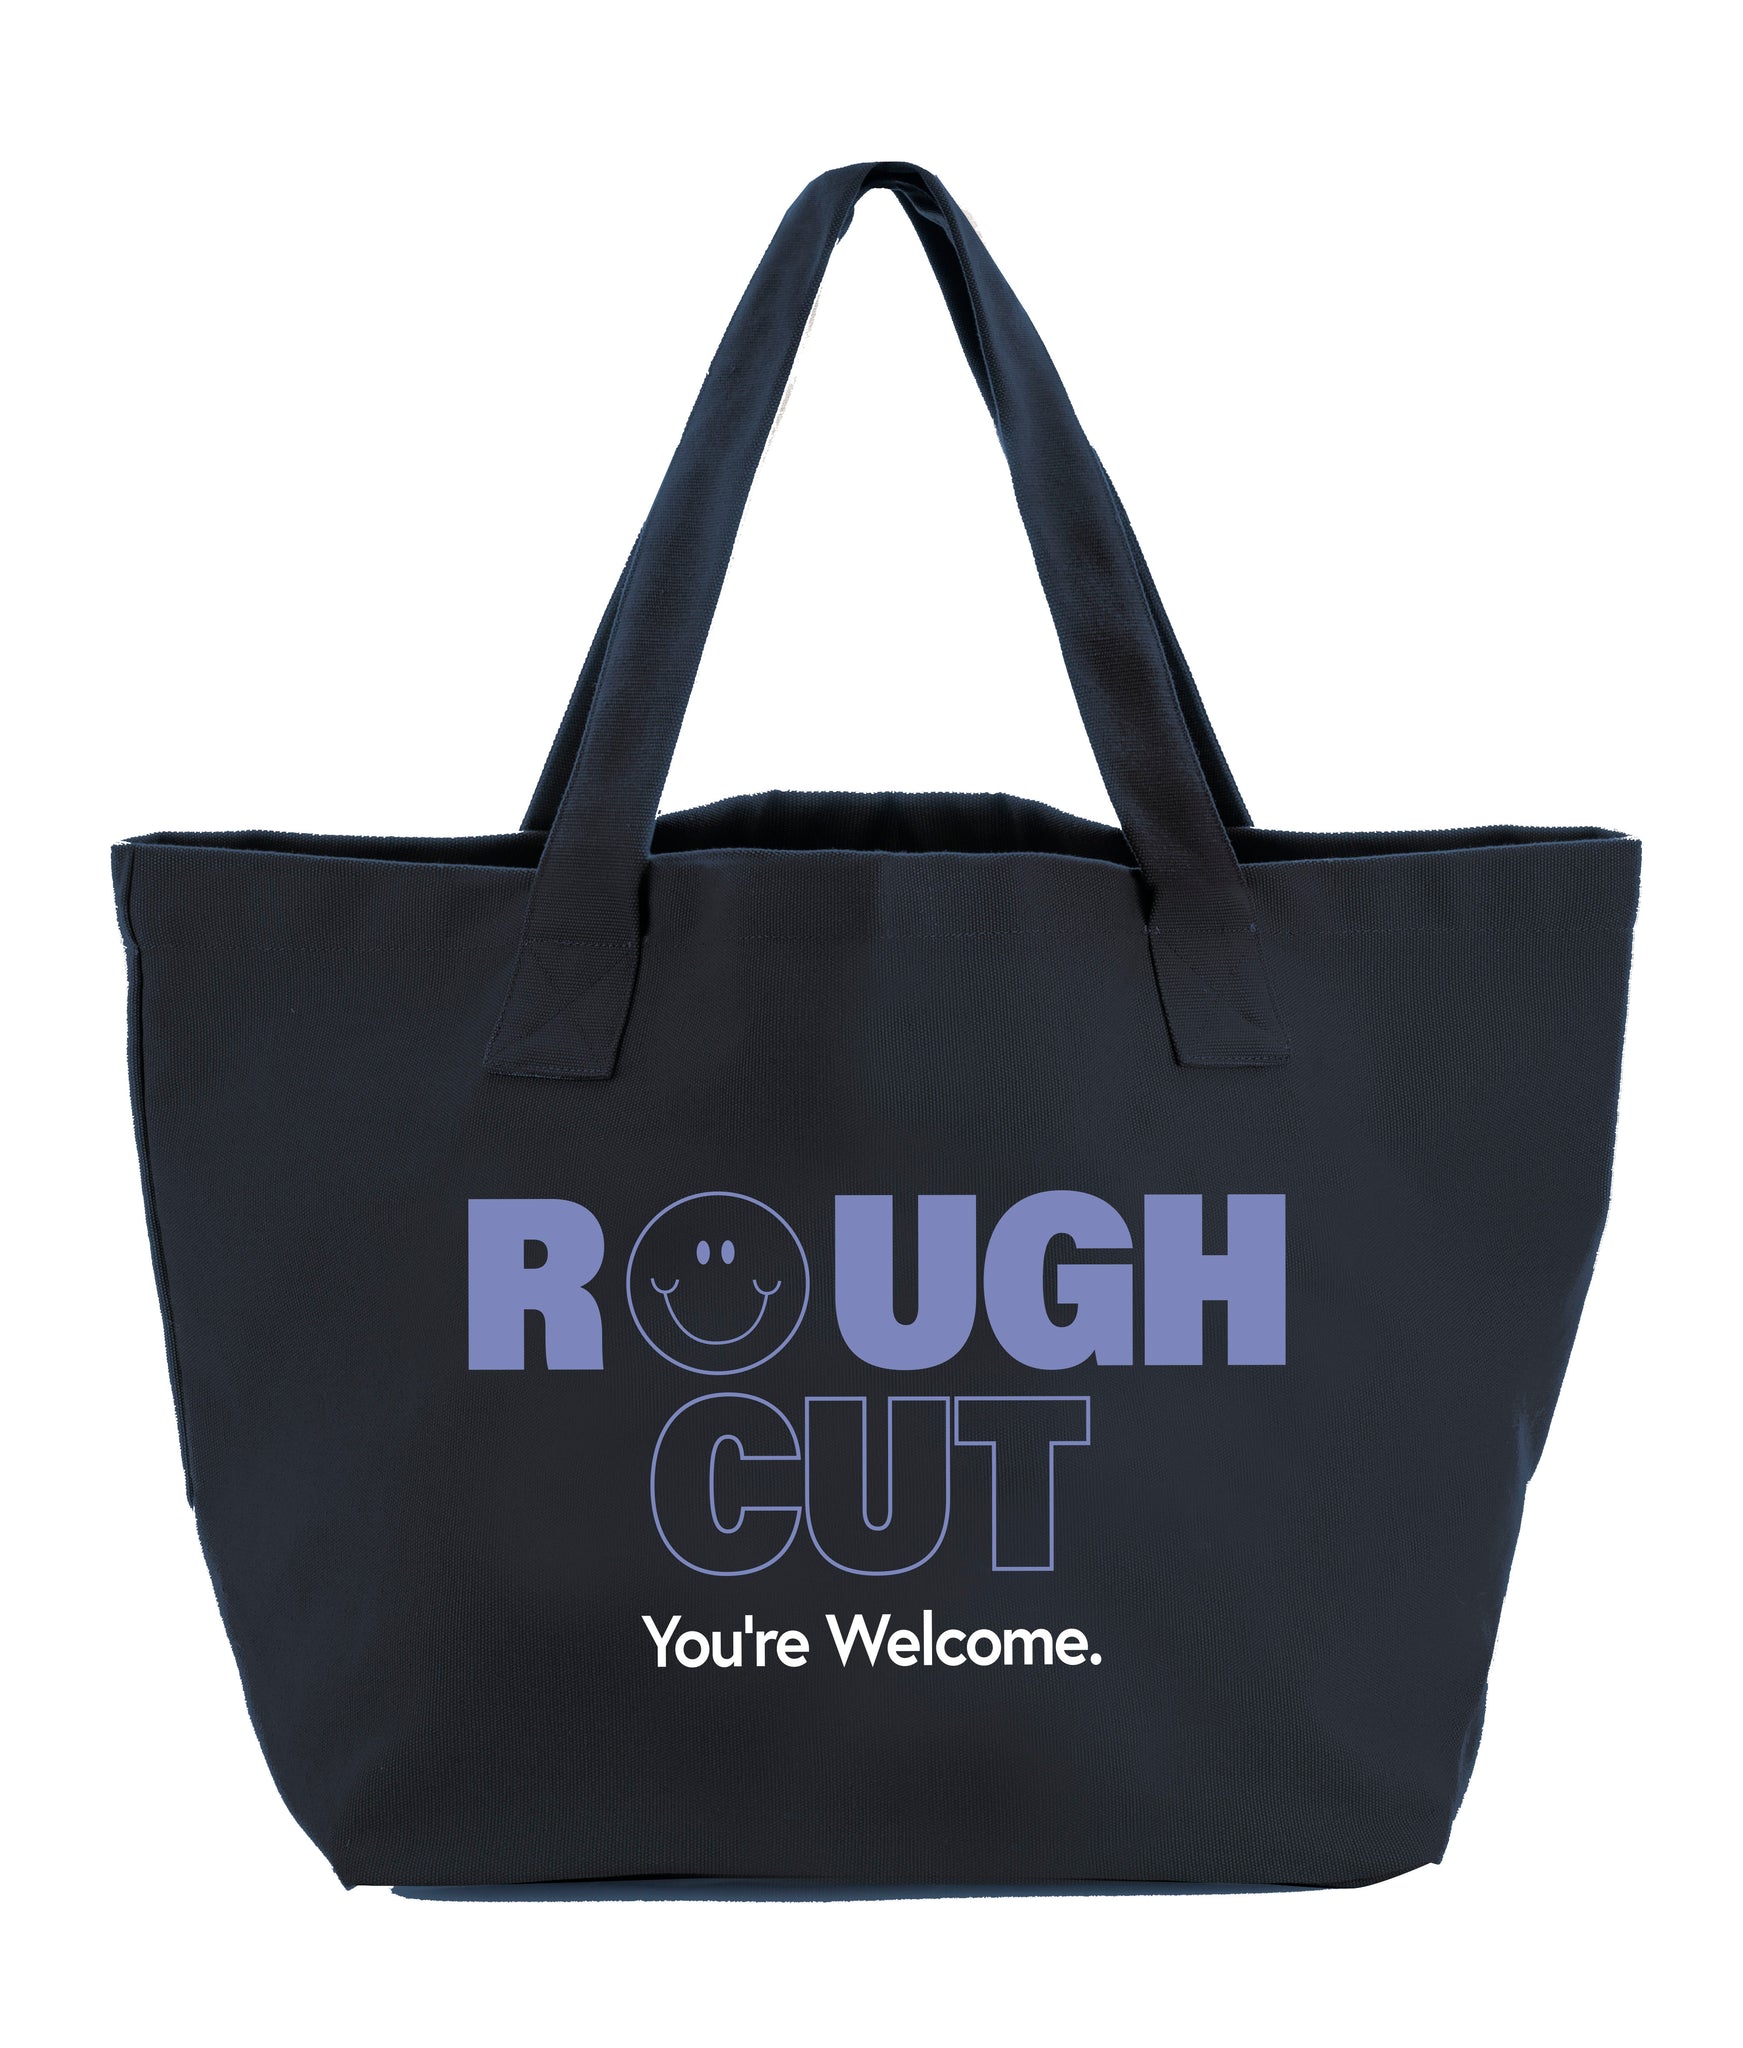 You're Welcome Tote Bag / Dark Grey